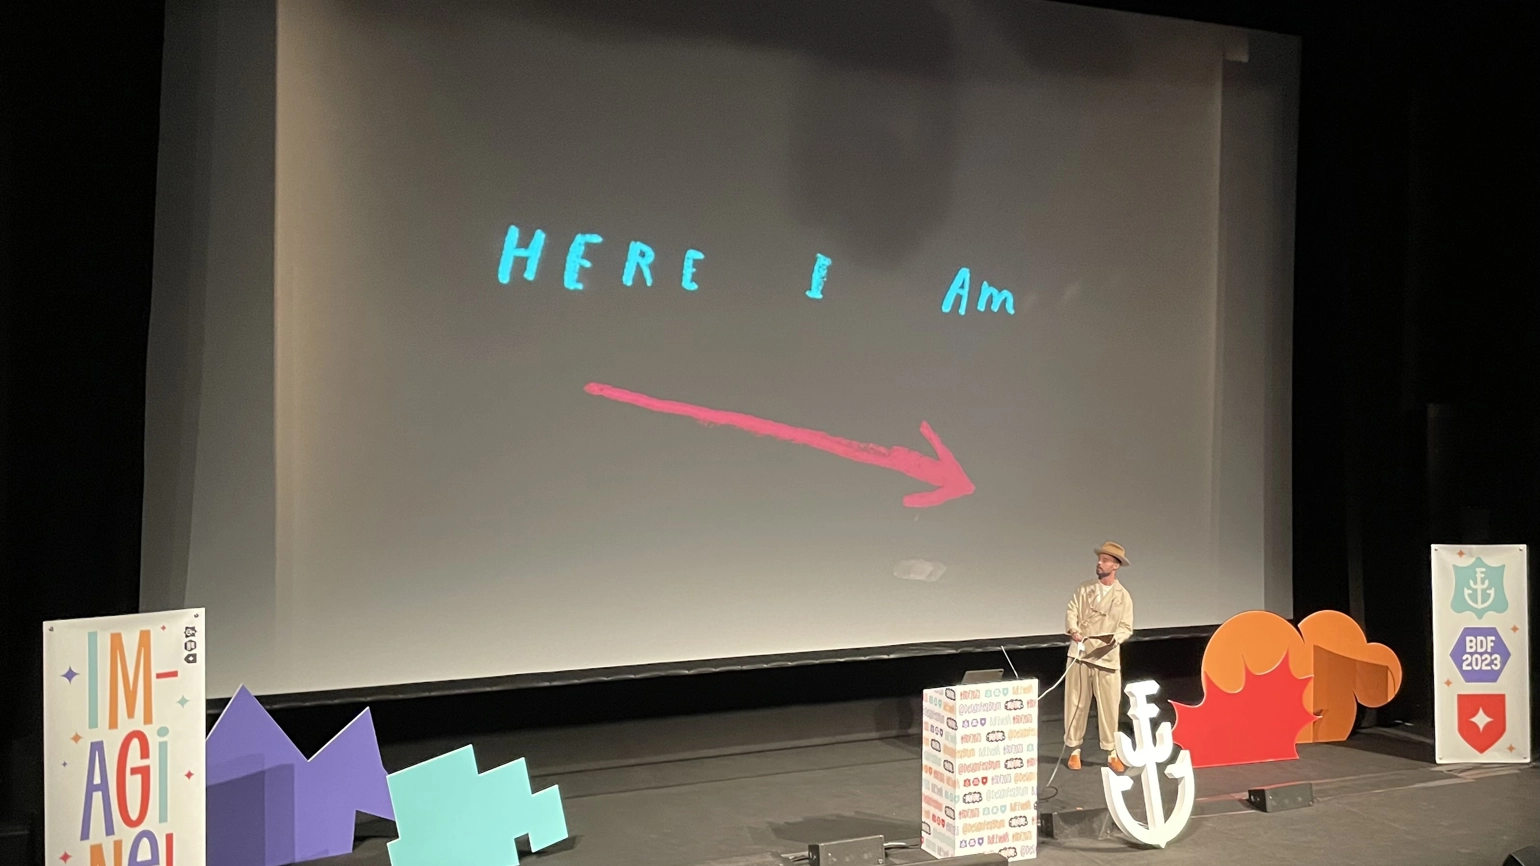 The stage at Birmingham Design Festival with the screen reading 'Here I Am' above an arrow that points to the speaker